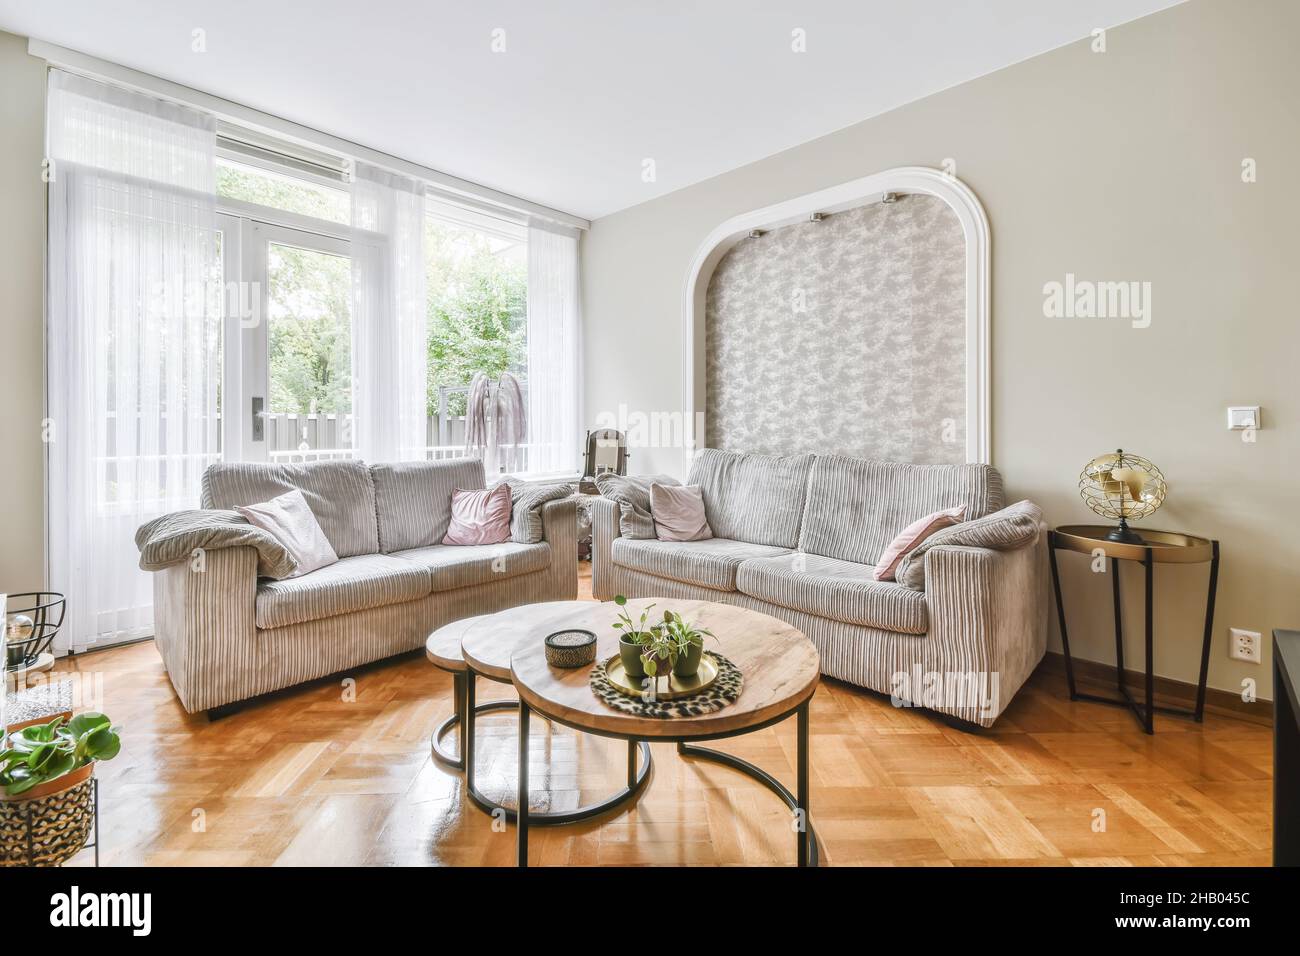 Amazing living room with gray sofas and round coffee table Stock Photo